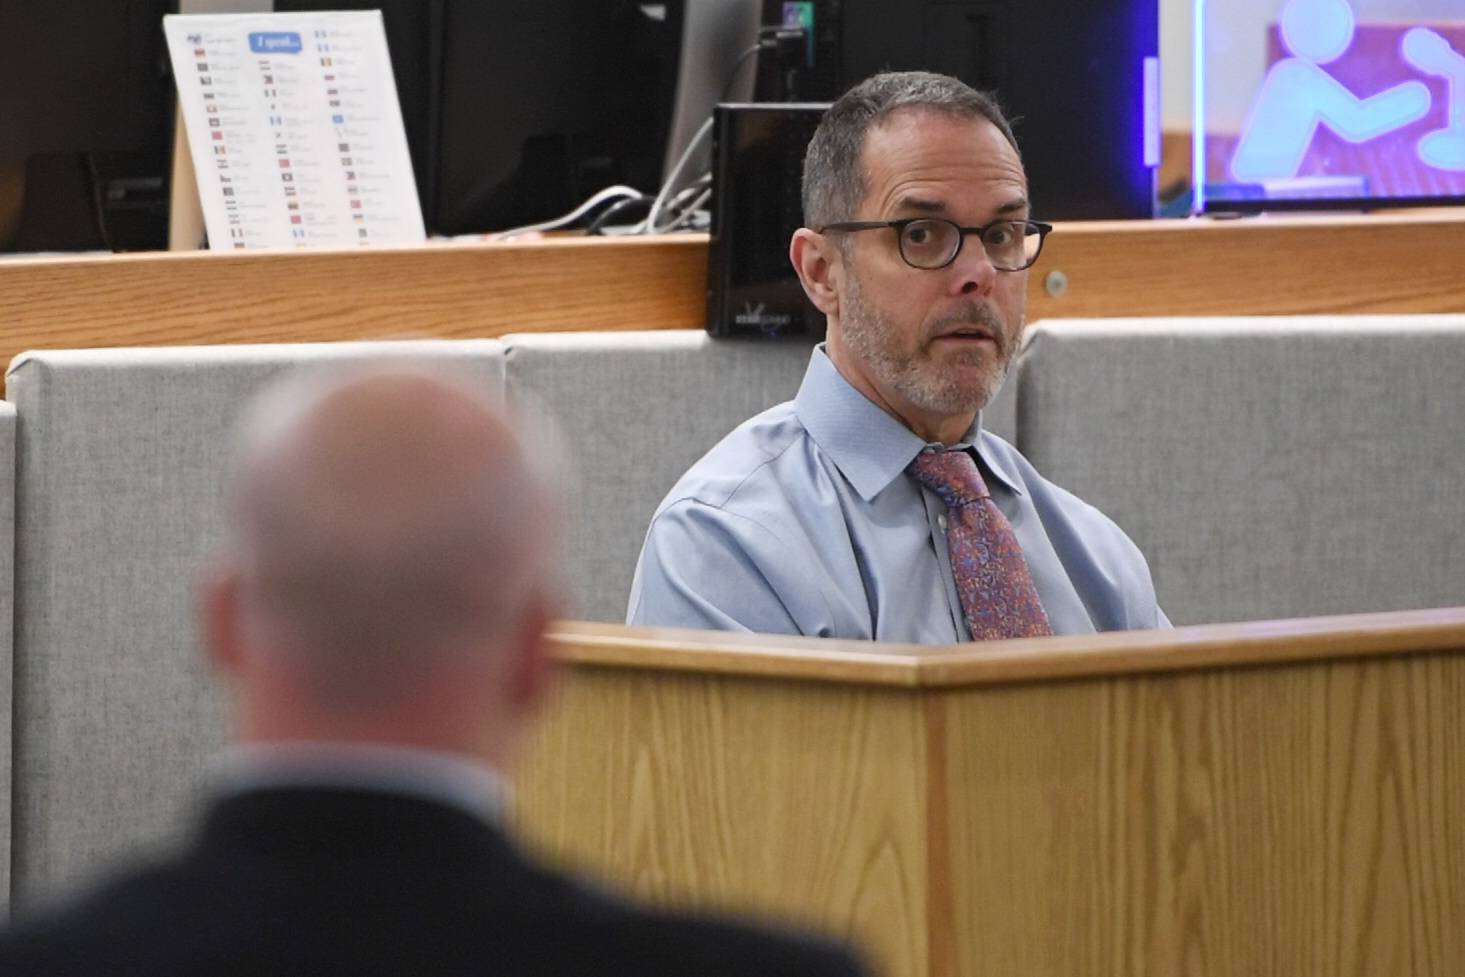 Dr. Mark McClung testifies during the sentencing of Ty Grussendorf in Juneau Superior Court on Friday, June 21, 2019. (Michael Penn | Juneau Empire)